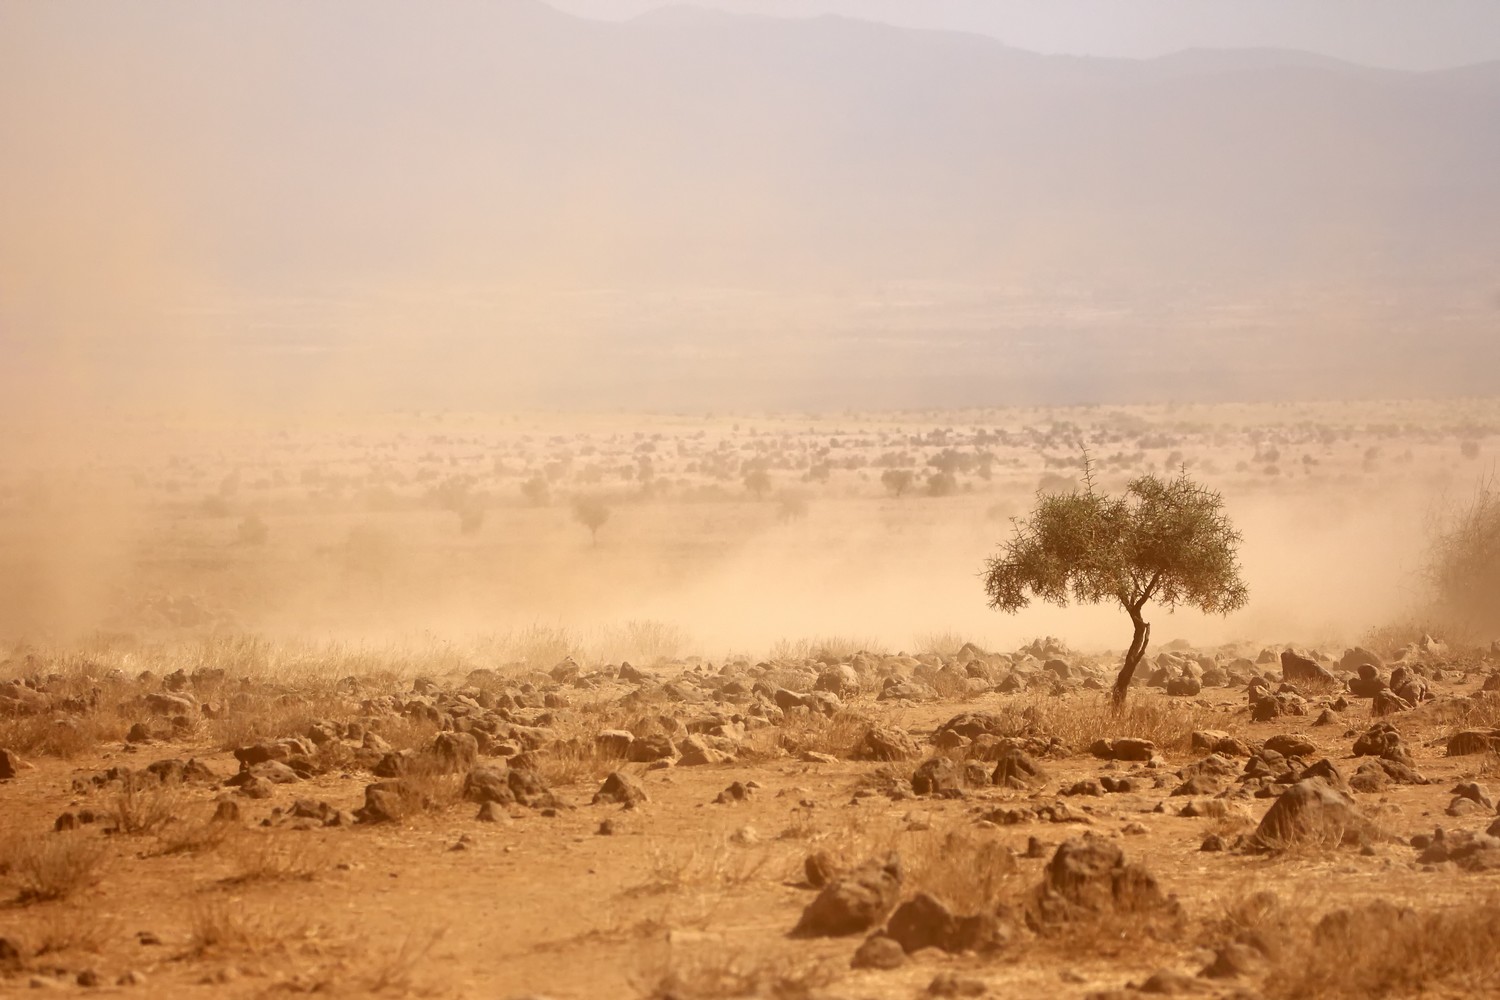 Dusty plains during a severe drought in Kenya: Climate change has increased the frequency and magnitude of extreme weather events that have led to a loss of lives, diminished livelihoods, reduced crop and livestock production, and damaged infrastructure, among other adverse impacts.